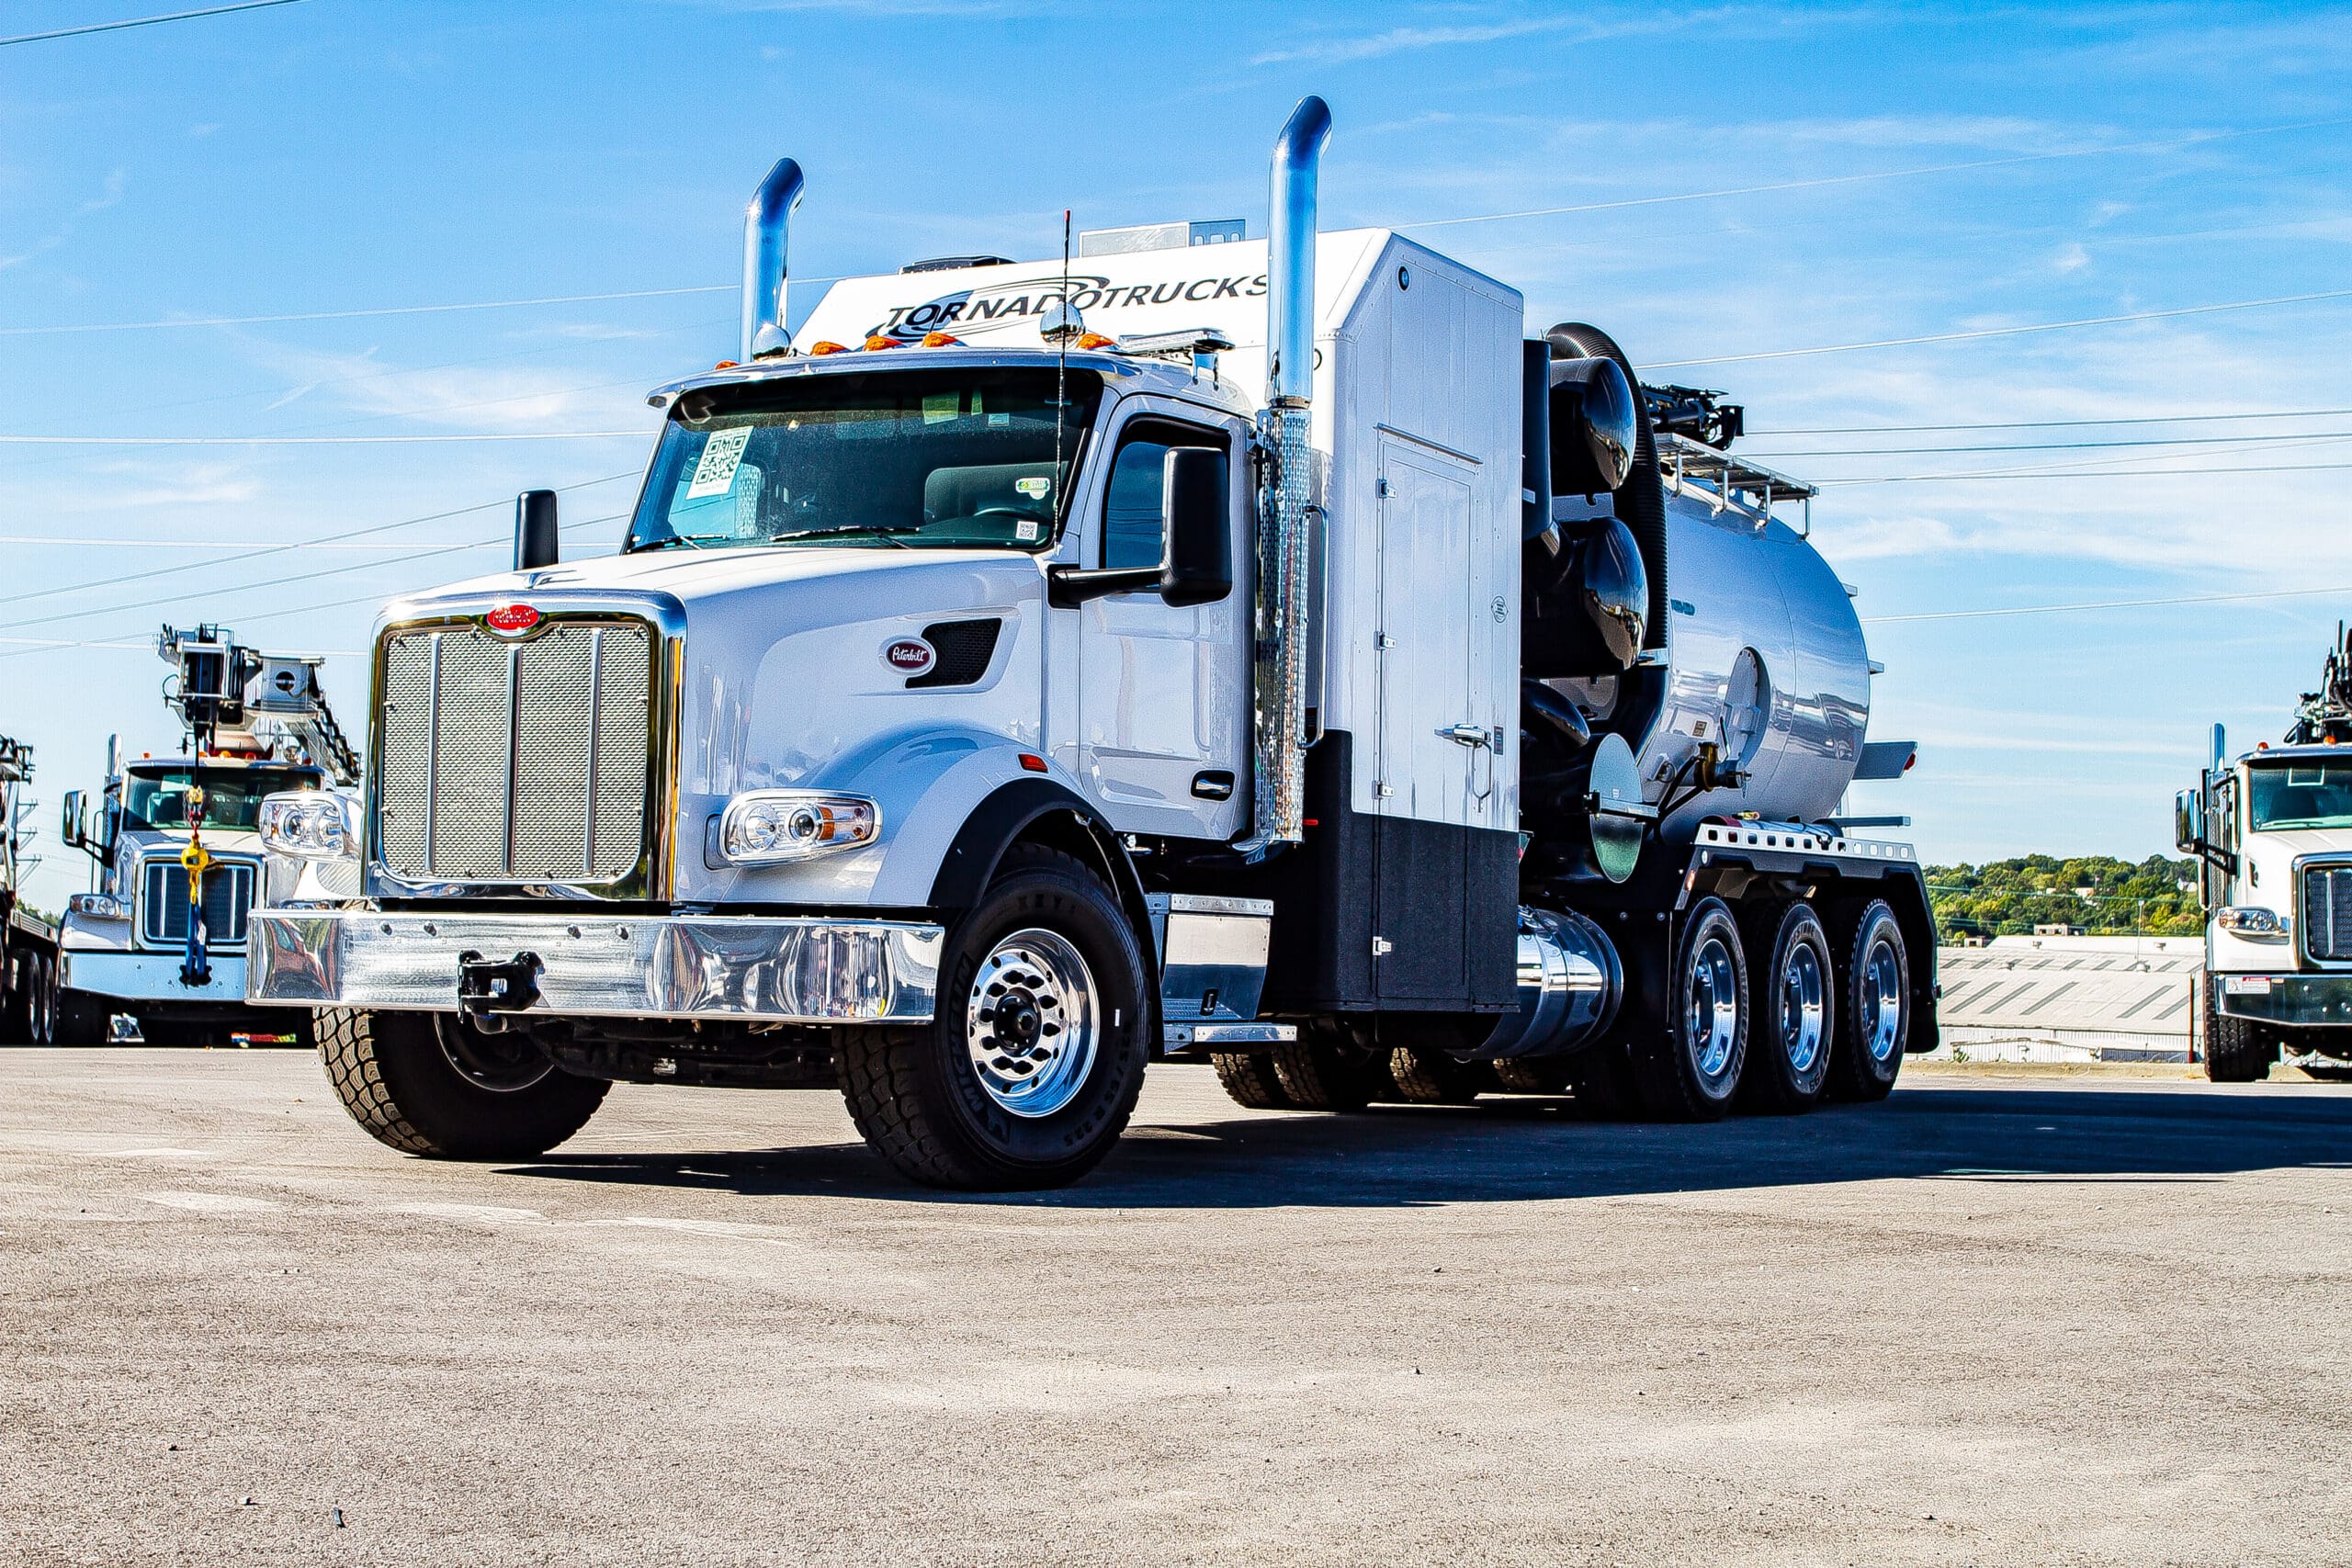 Custom Truck One Source - #ICUEE2019 Preview: #Tornado F4 Eco-Lite  #Hydrovac Truck  Booth: N-3017 This Tornado F4 Eco Lite hydrovac boasts a  tridem axle with a 90″ x 10′ tank and